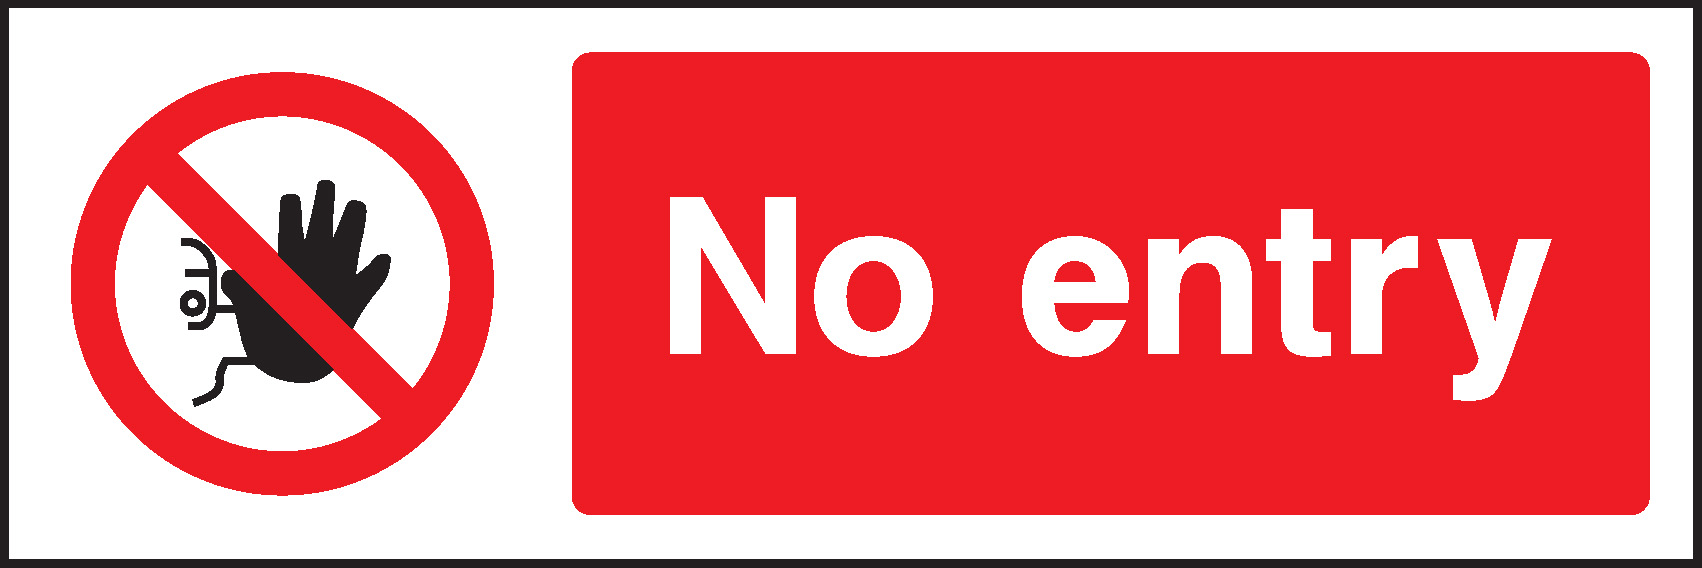 No entry safety sign